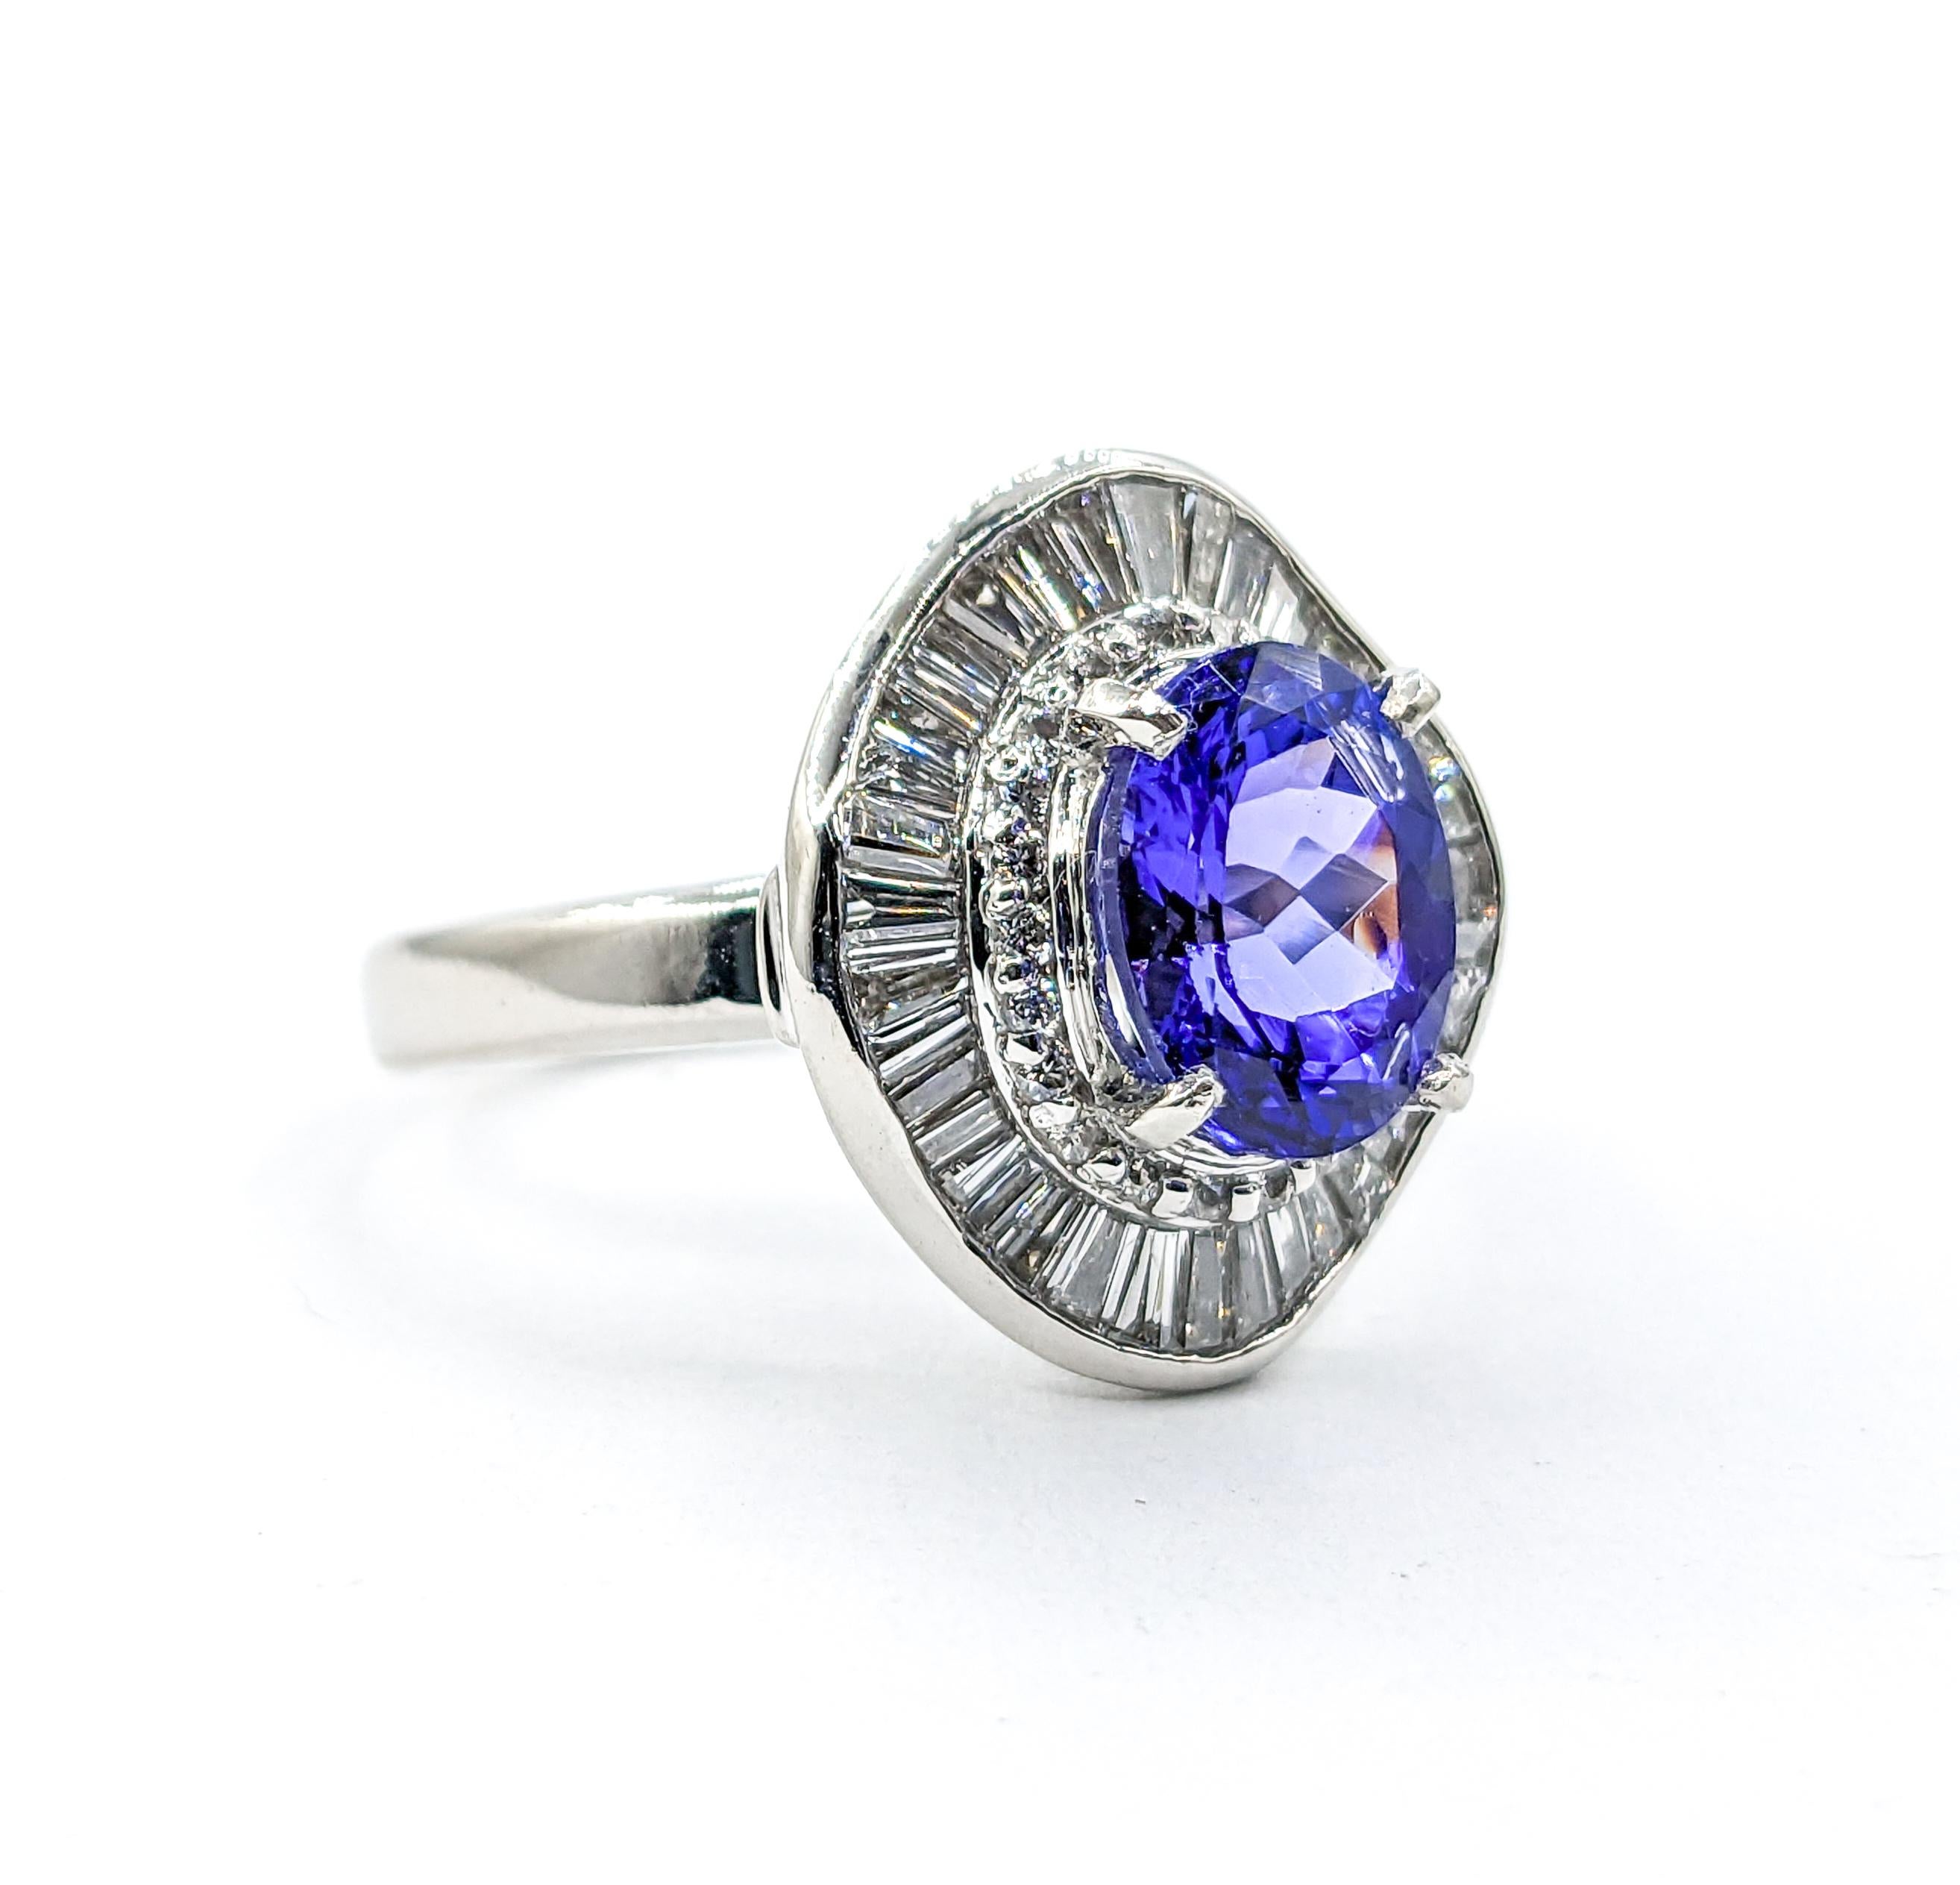 2.35ct Purple Tanzanite & Diamond Ring In 900 Platinum 

Introducing this stunning Tanzanite ring, masterfully crafted in 900 platinum, and adorned with 1.05ctw of tapered baguette and round diamonds. This piece boasts a stunning 2.35ct Purple